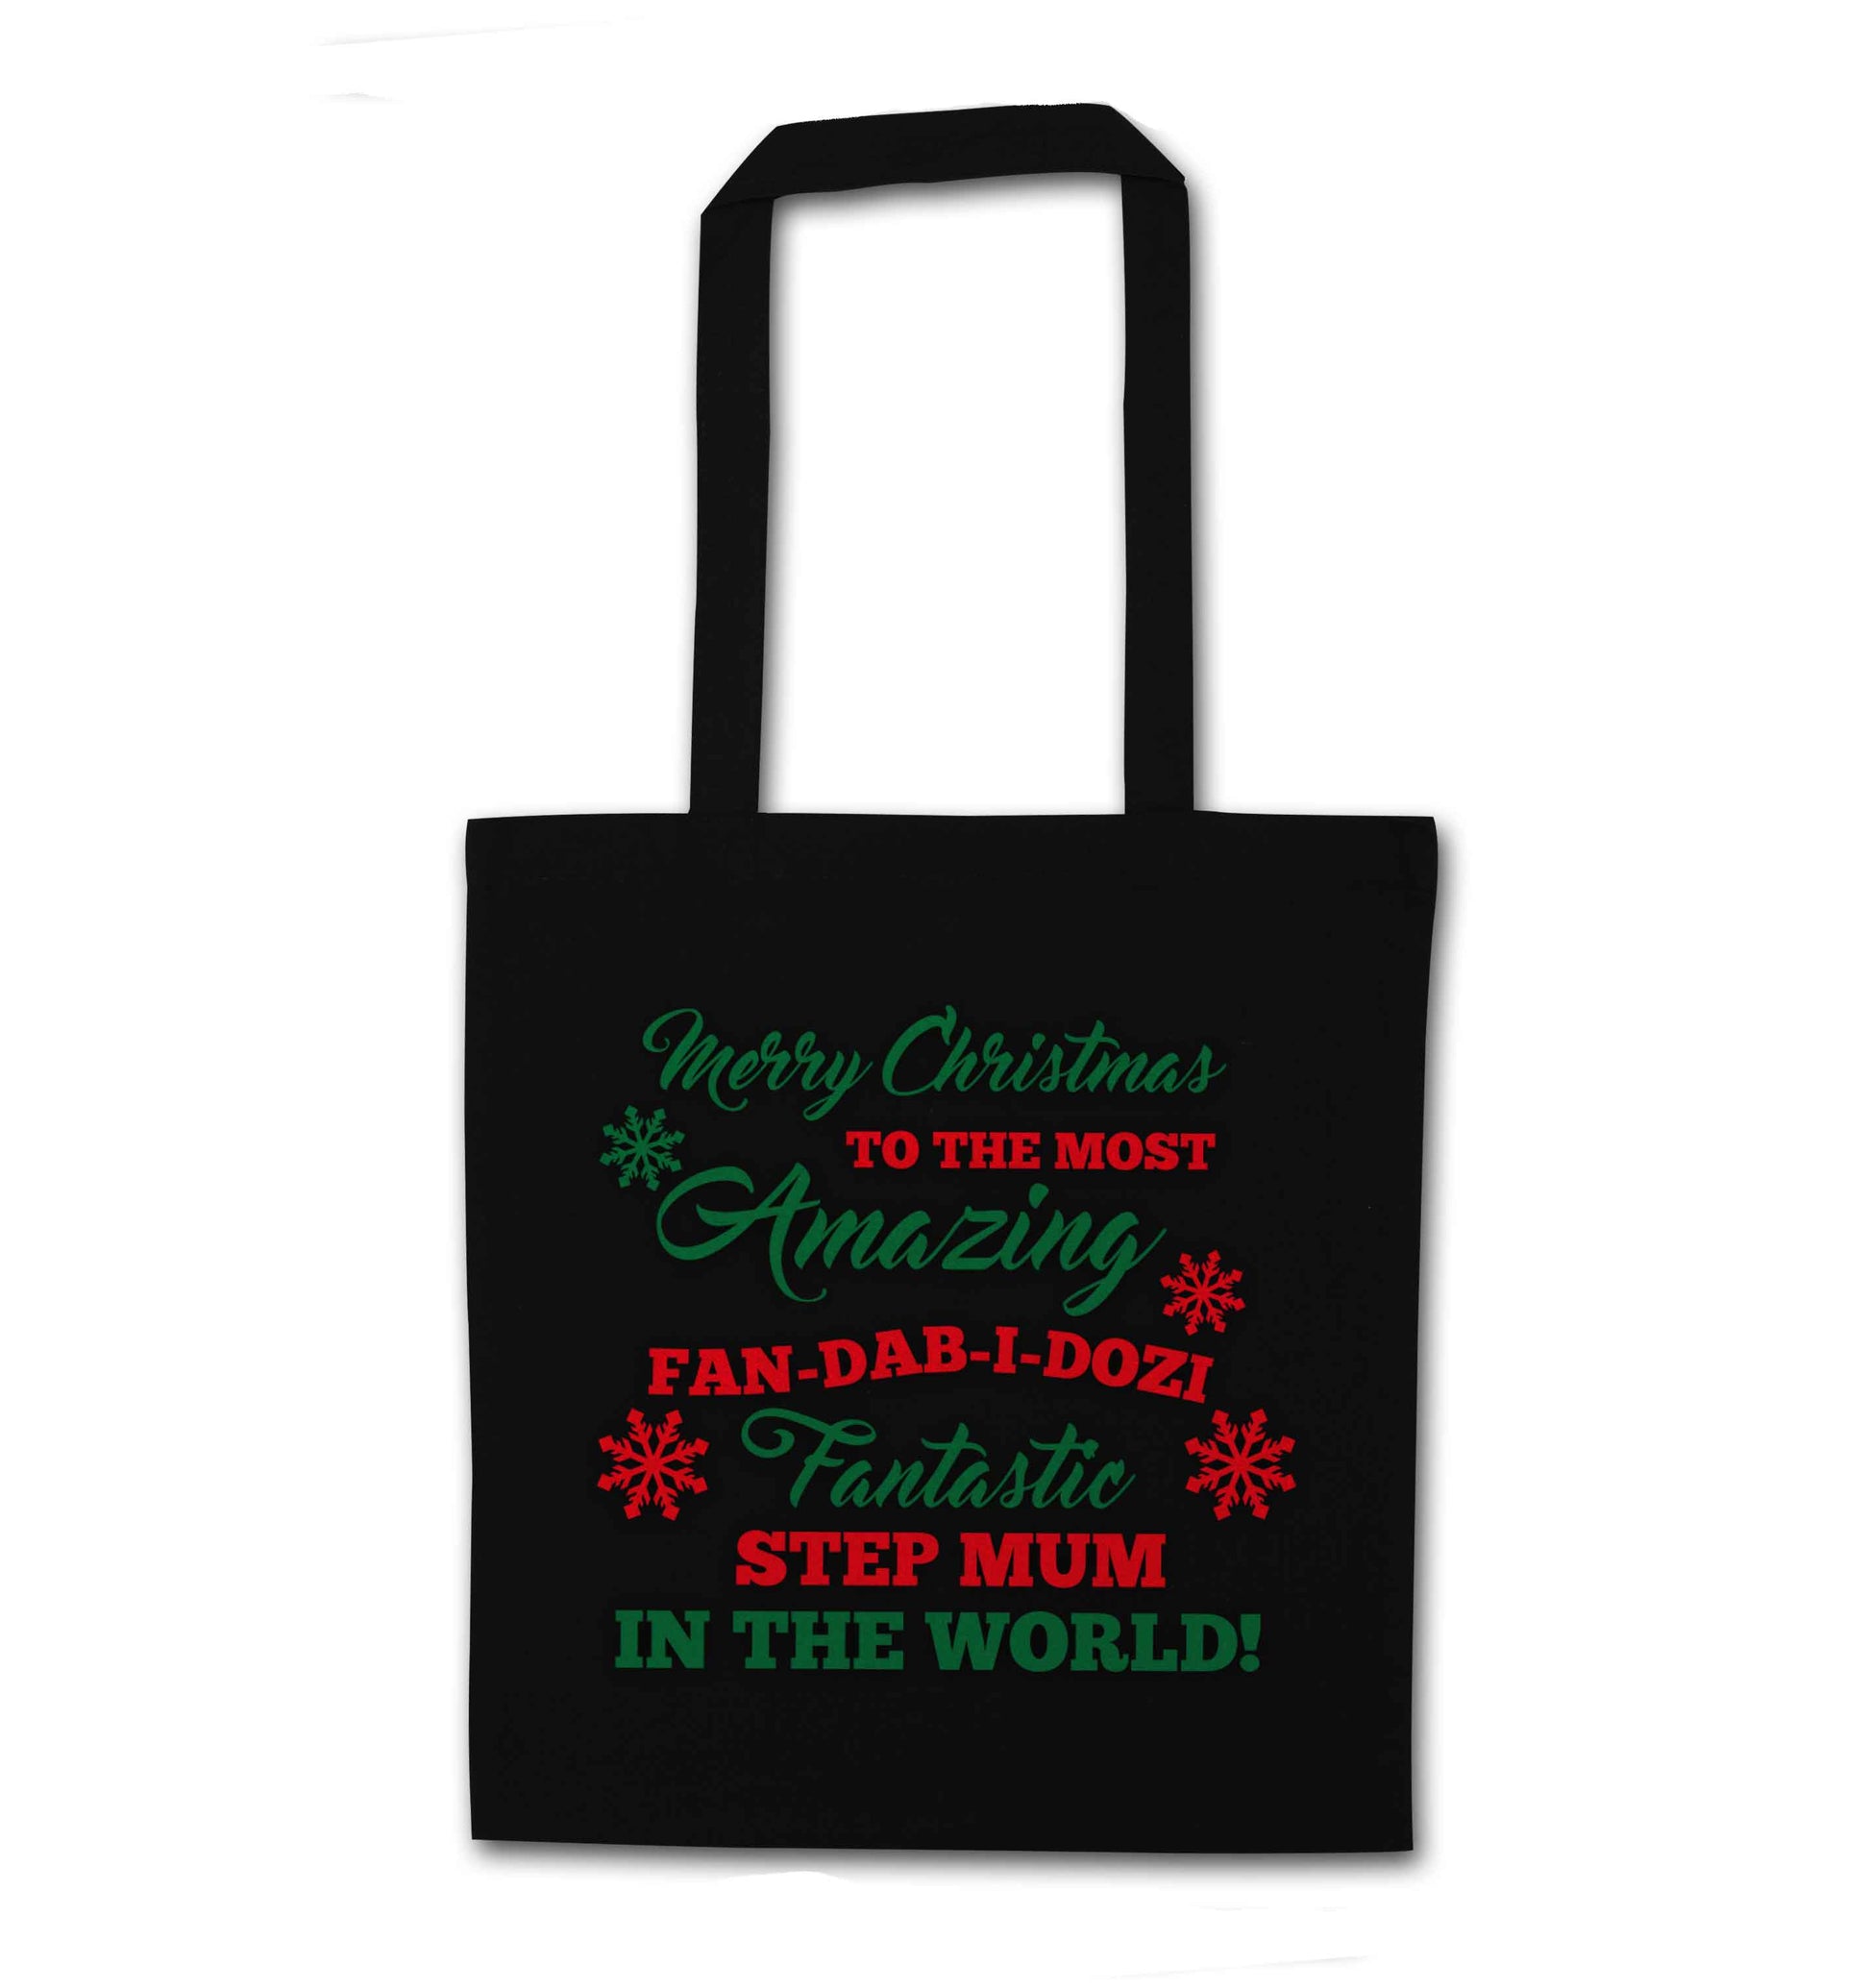 Merry Christmas to the most amazing fan-dab-i-dozi fantasic Step Mum in the world black tote bag